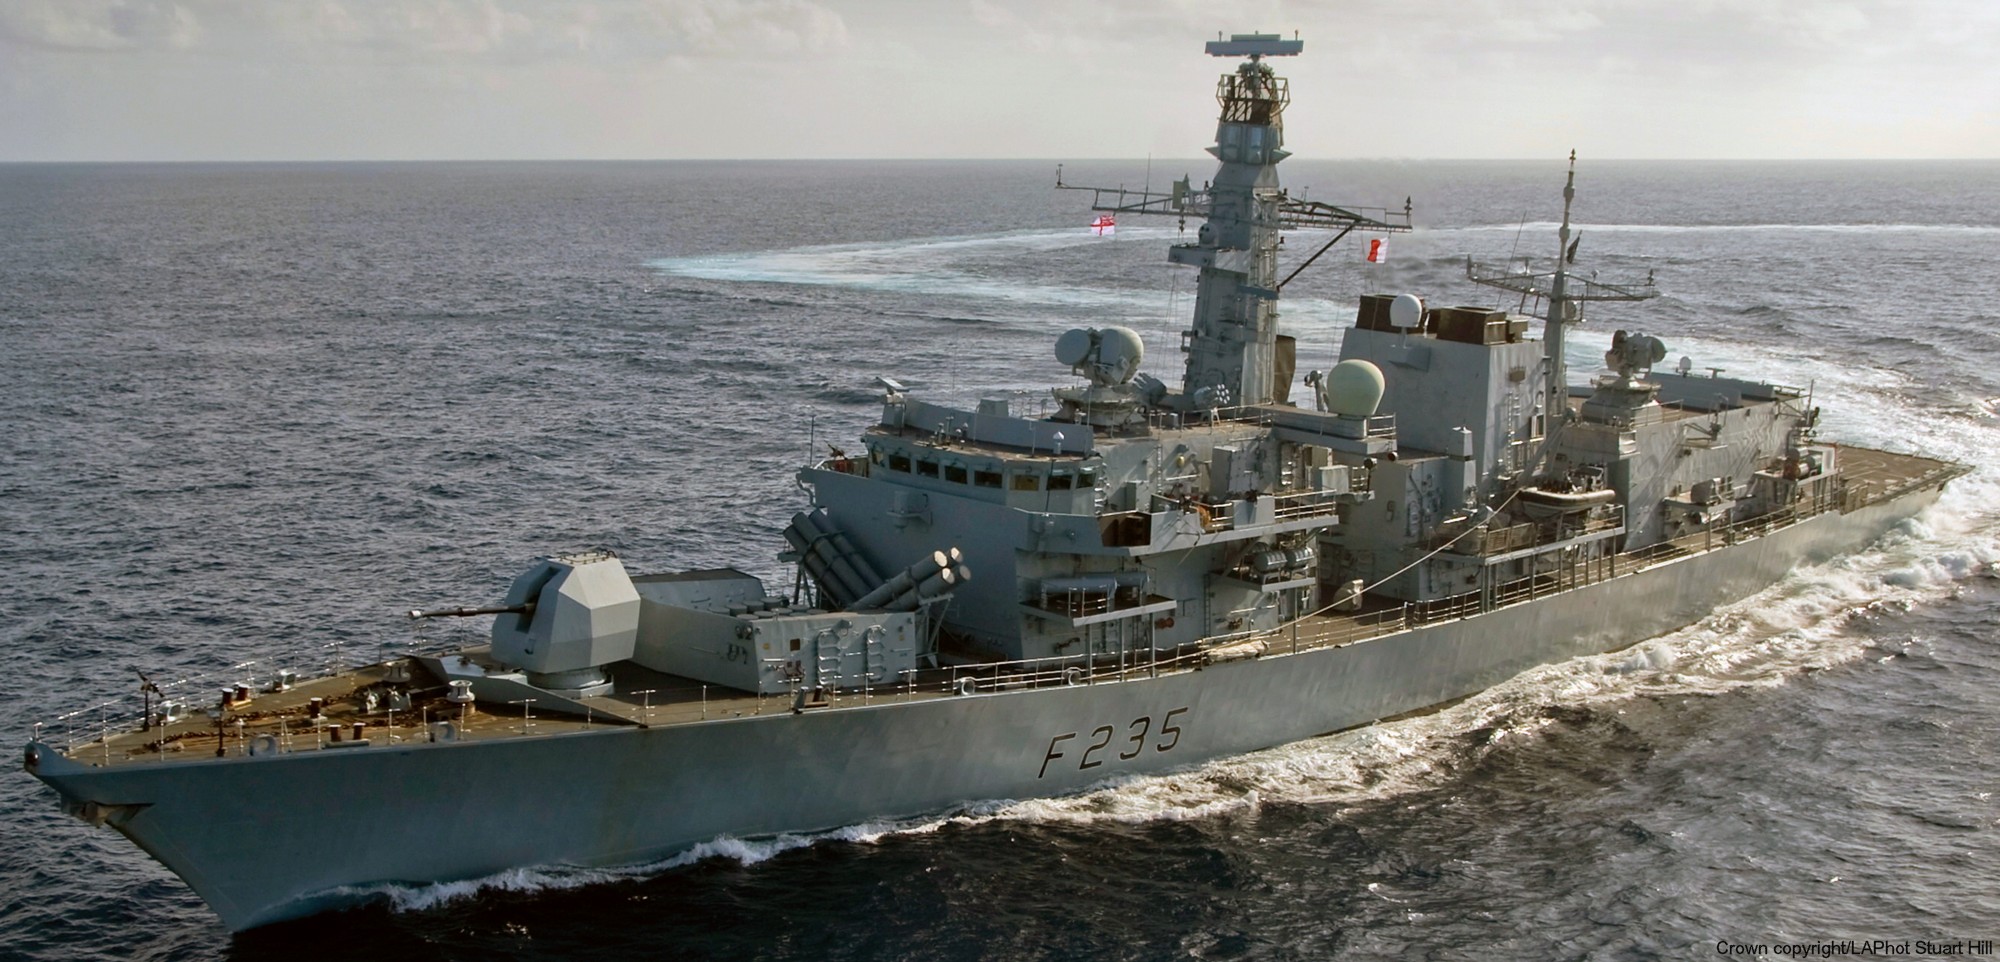 f-235 hms monmouth type 23 duke class guided missile frigate ffg royal navy 05